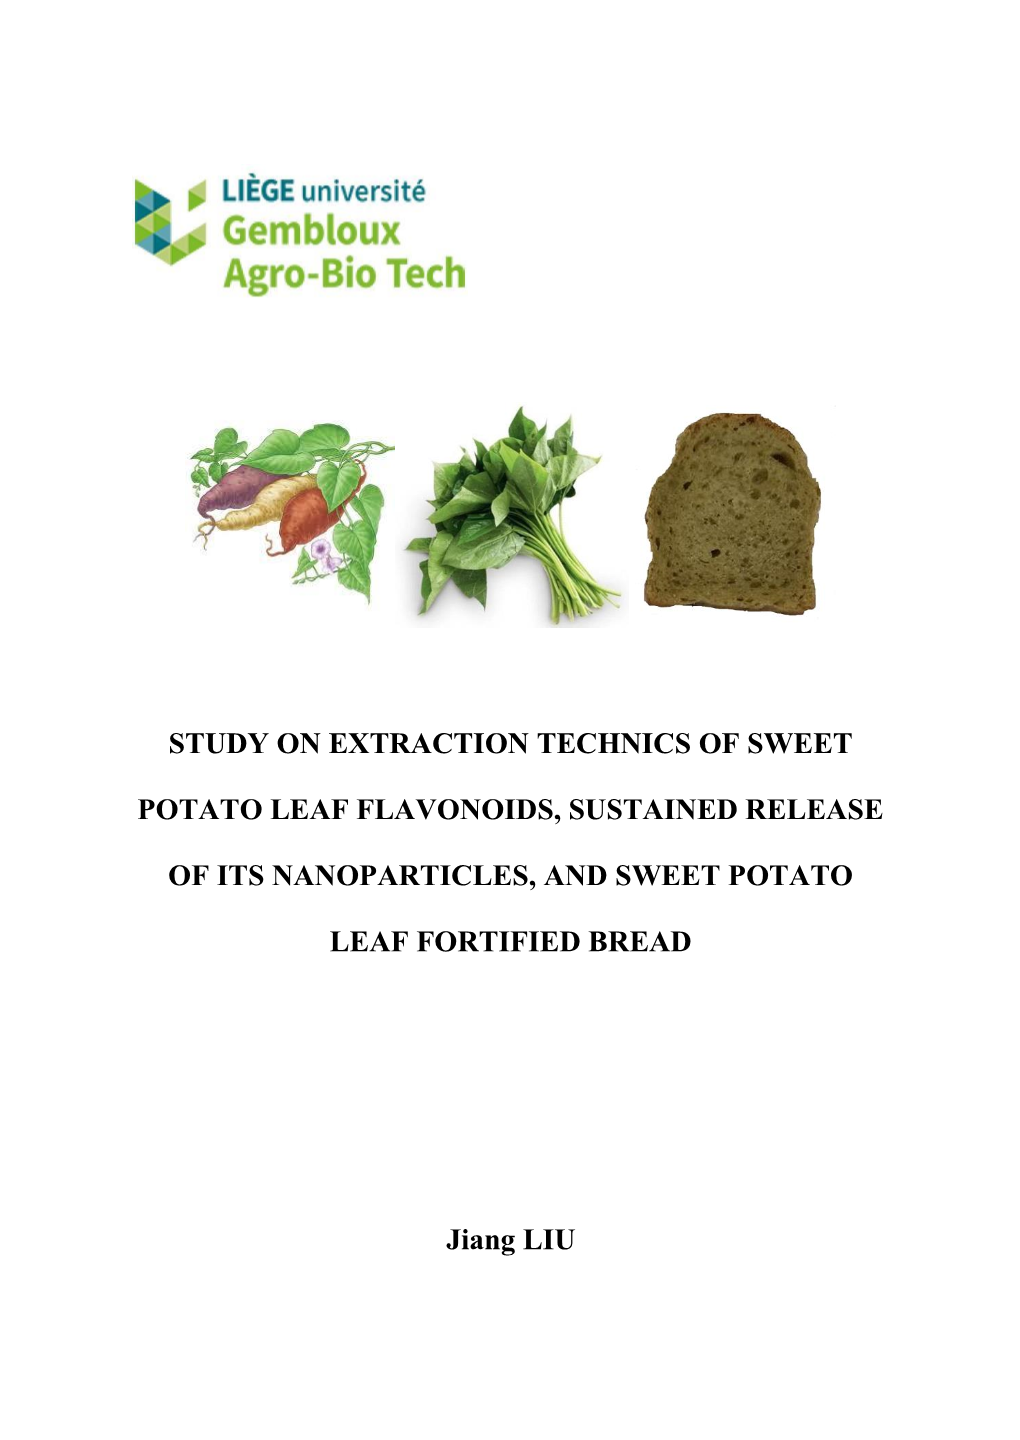 Study on Extraction Technics of Sweet Potato Leaf Flavonoids, Sustained Release of Its Nanoparticles, and Sweet Potato Lea F Fortified Bread